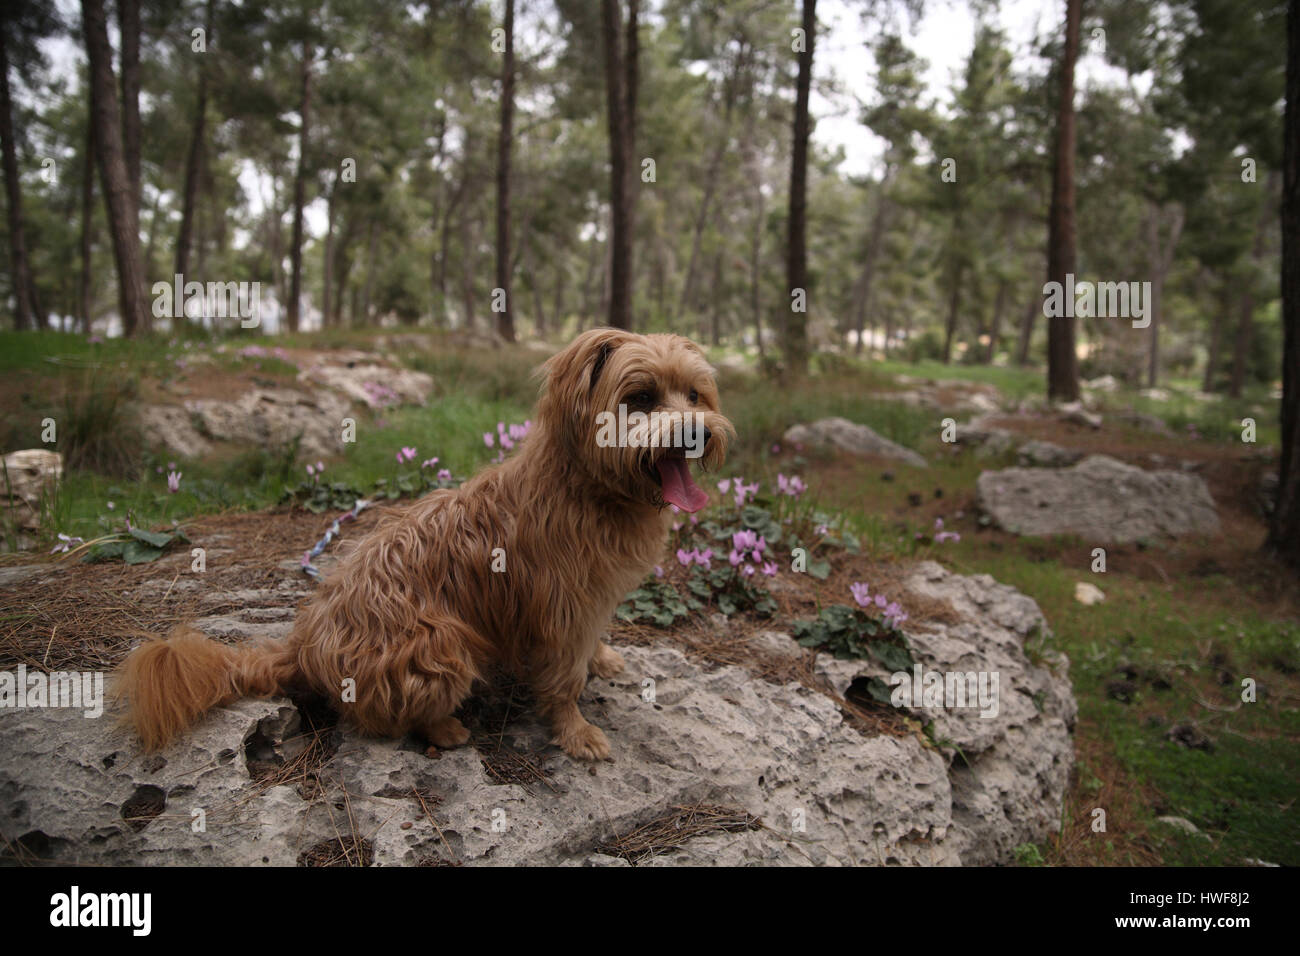 A yorkshire terrier dog rests with his tongue out on a dolomite rock with cyclamen flowers and pine trees behind. Aminadav Forest, Jerusalem, Israel. Stock Photo